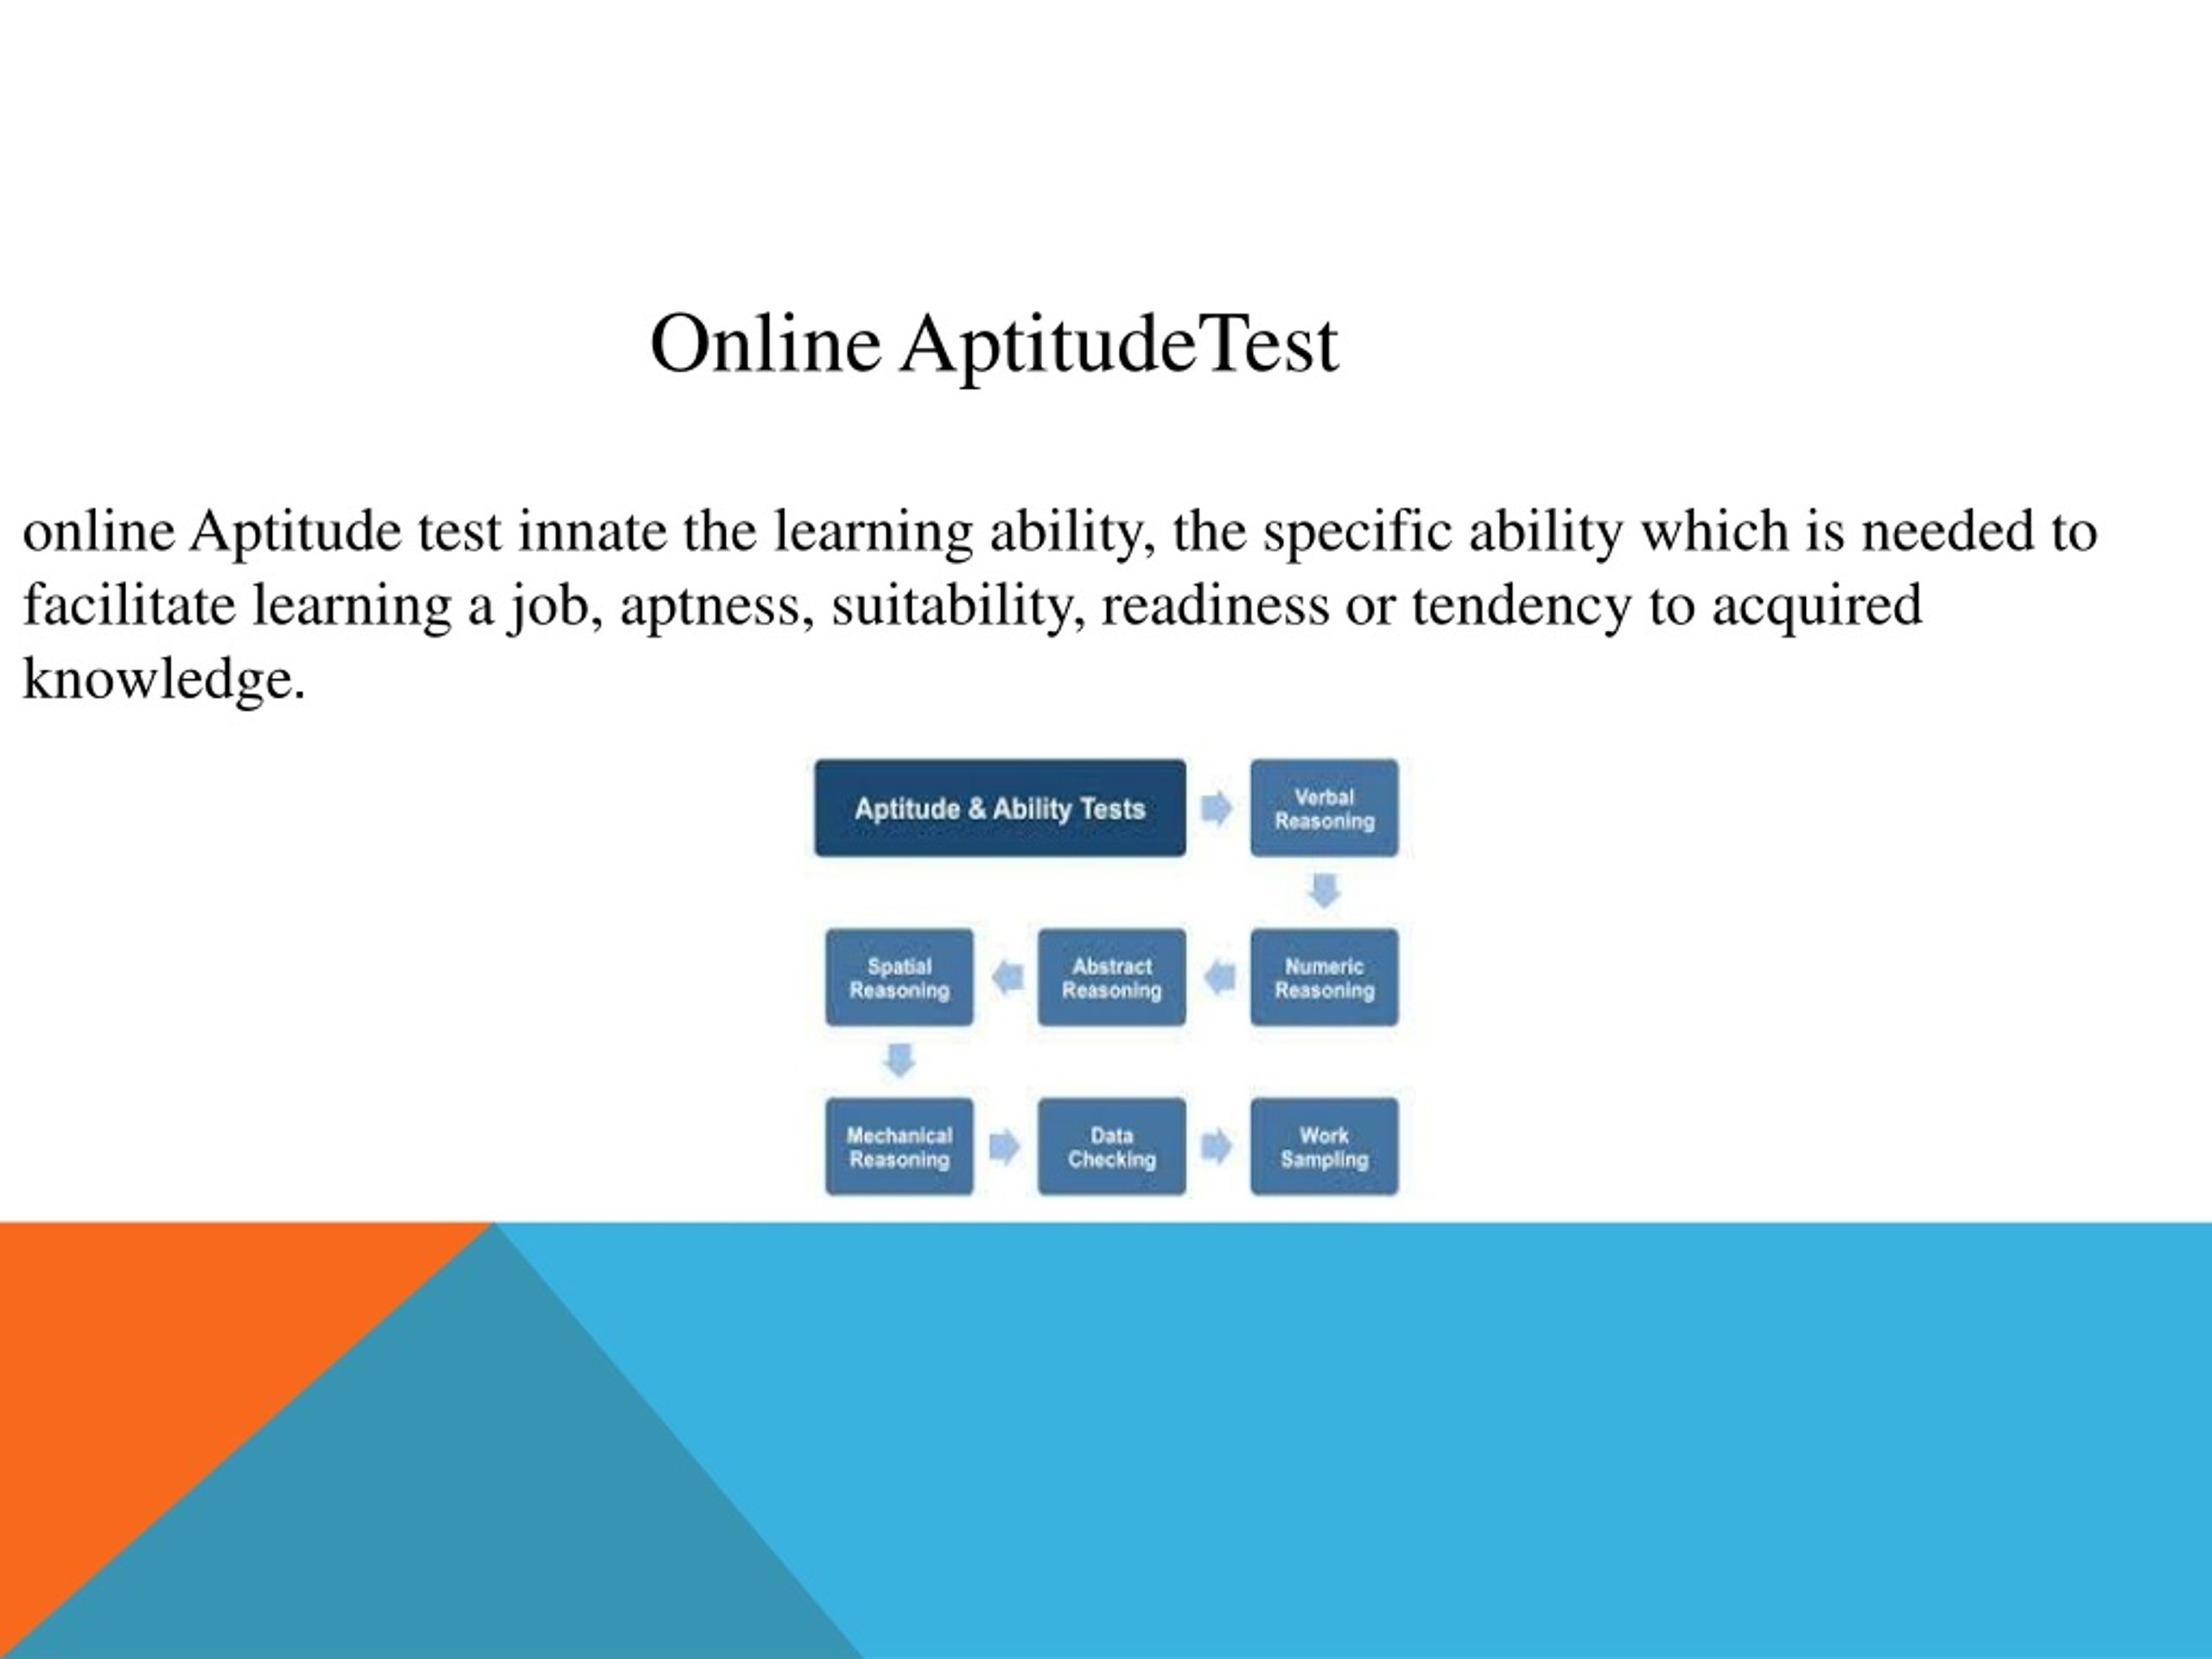 who-can-take-the-aptitude-test